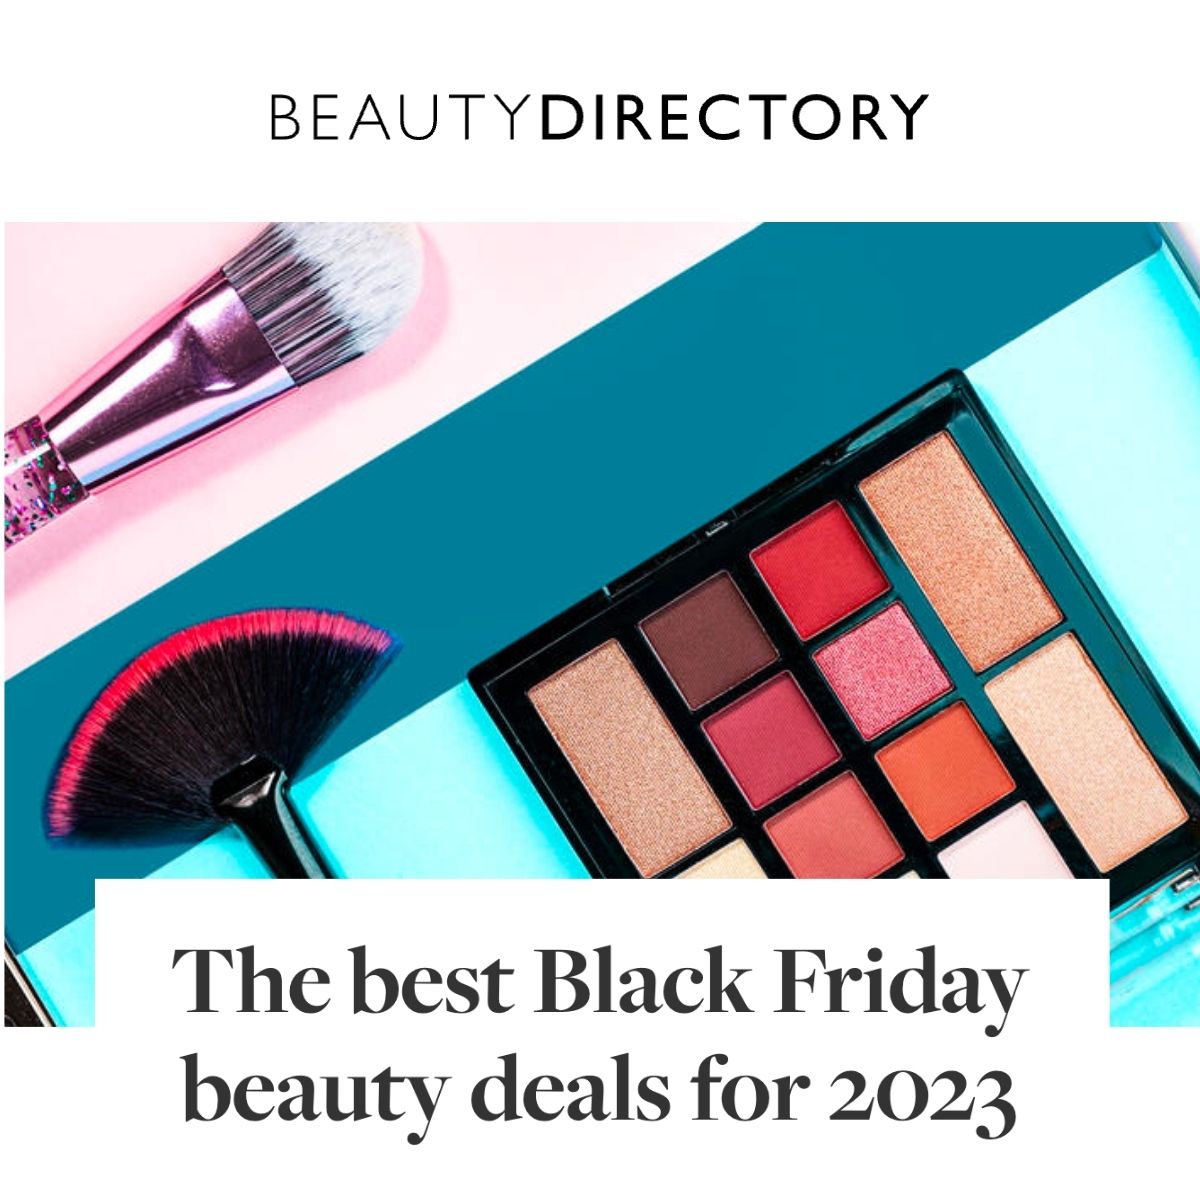 The best Black Friday beauty deals for 2023